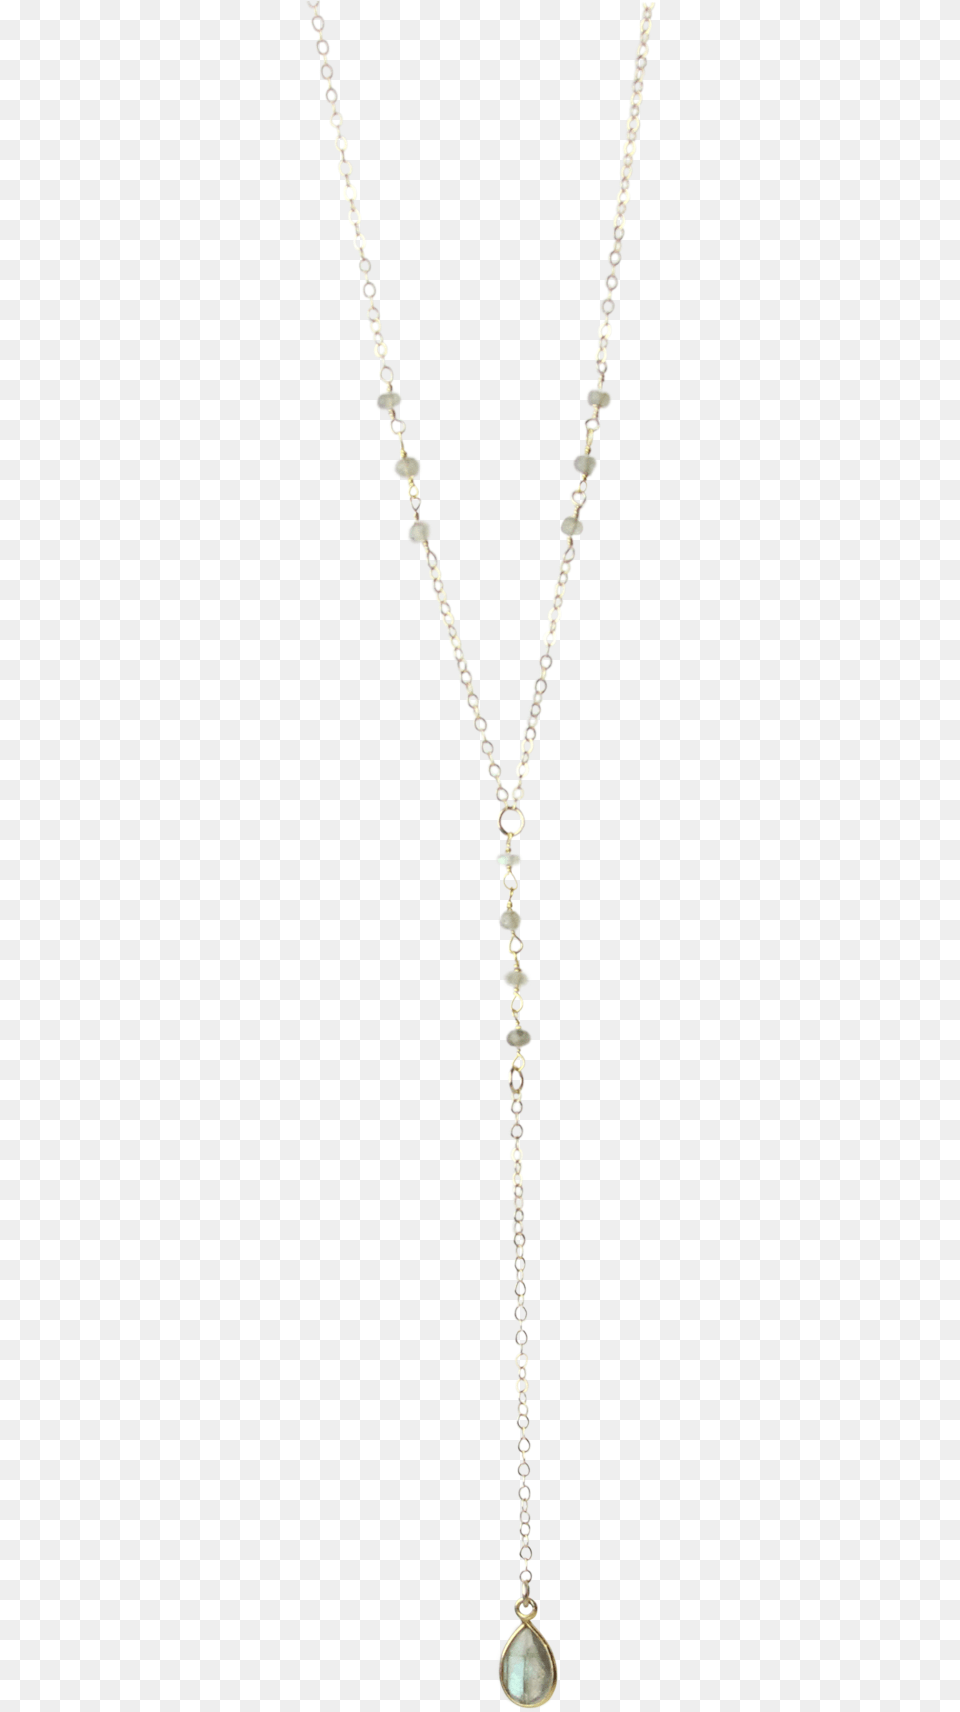 Droplets Pendulum Necklace In Gemstone, Accessories, Jewelry, Diamond, Pendant Png